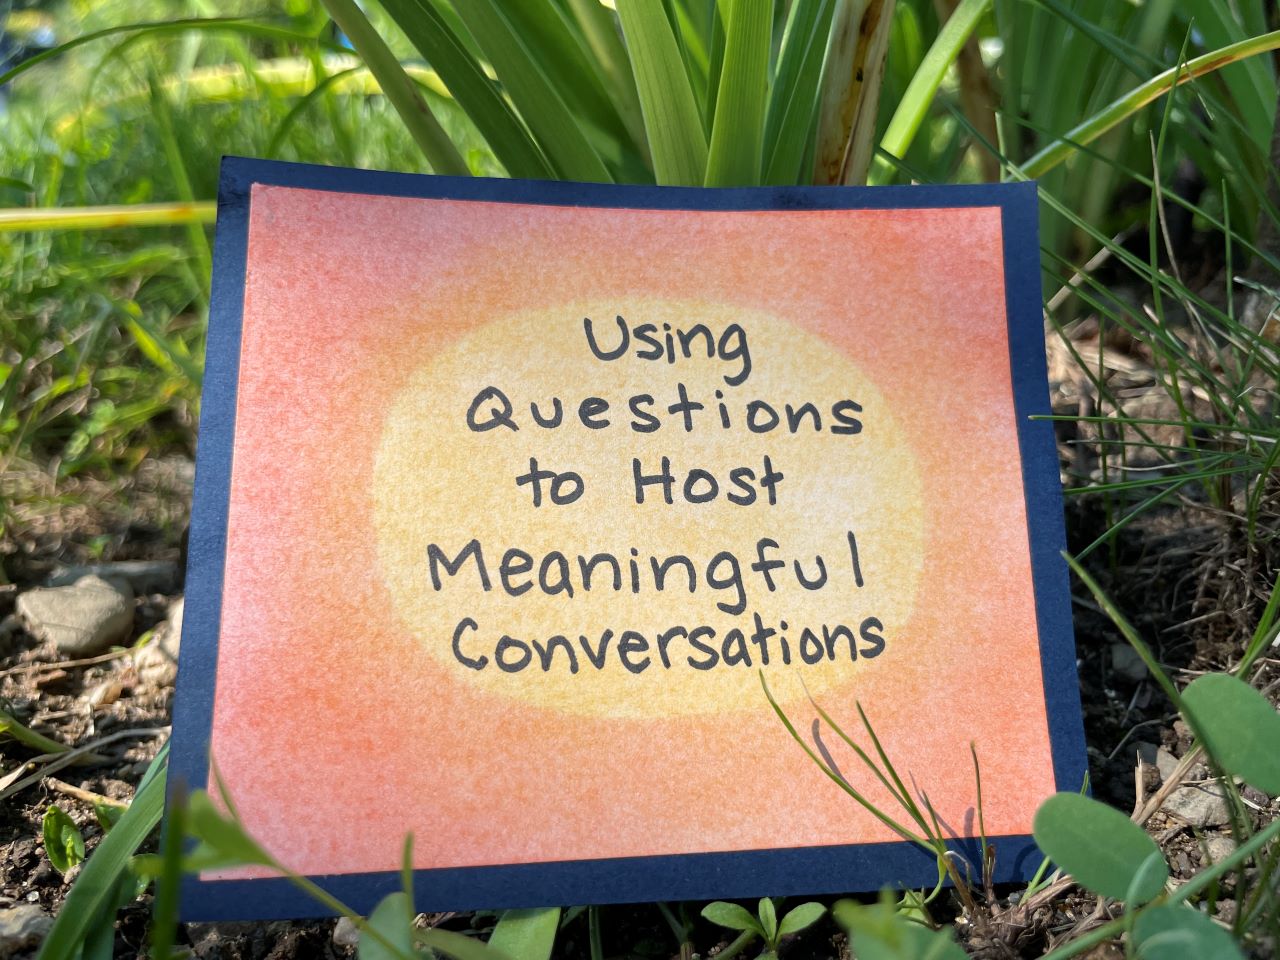 Using questions to host Meaningful Conversations